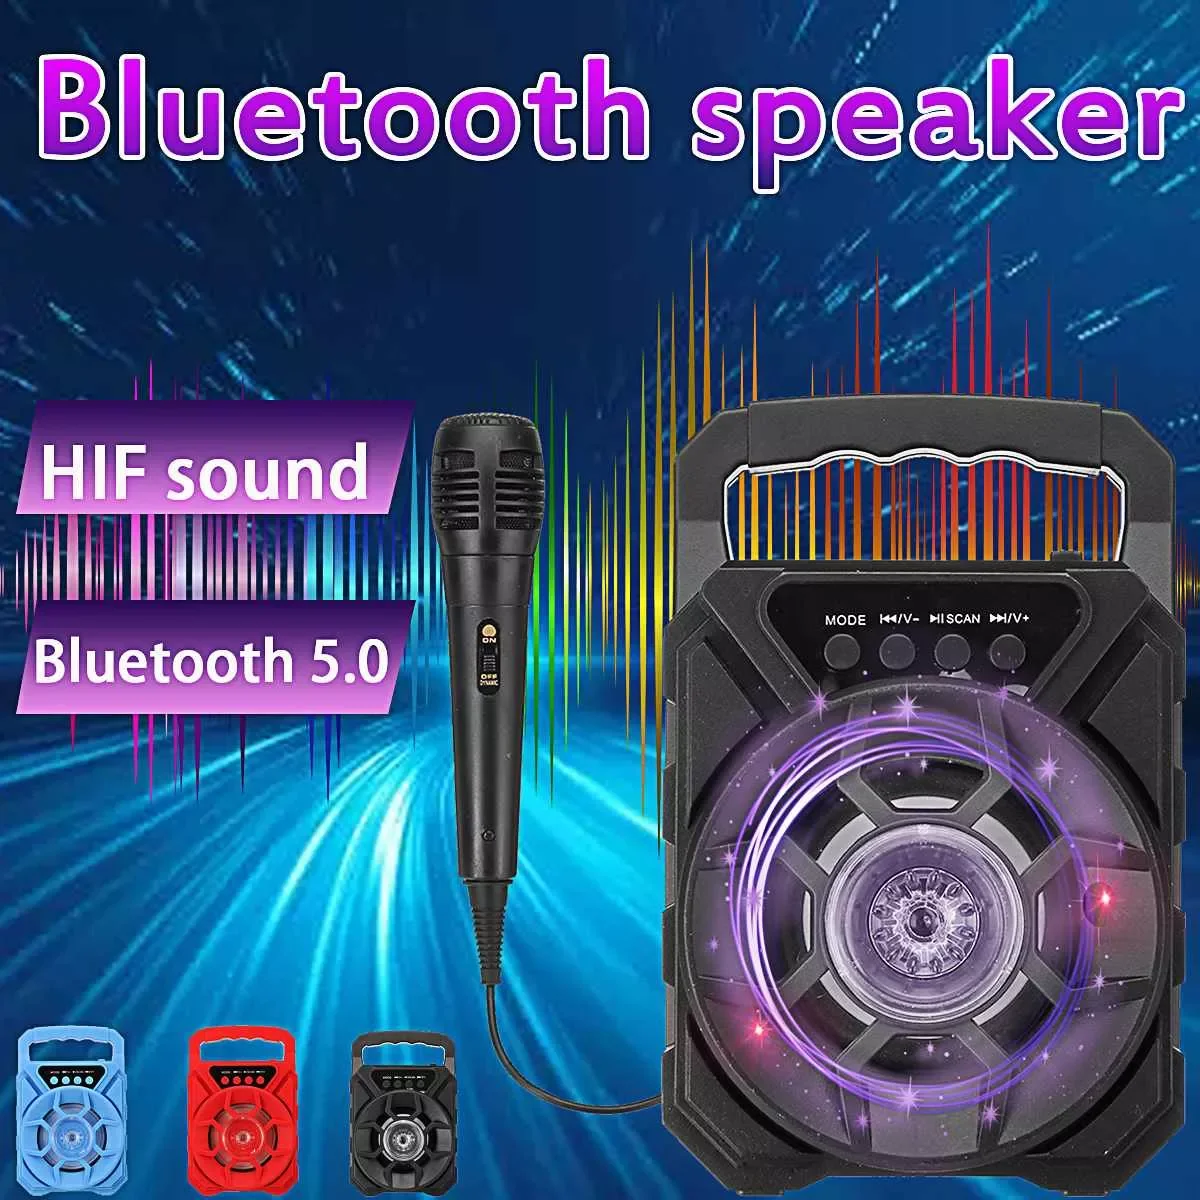 

Portable bluetooth Speaker Wireless Bass Subwoofer Outdoor Speakers 5.0 buletooth AUX TF USB Stereo Loudspeaker Music Box